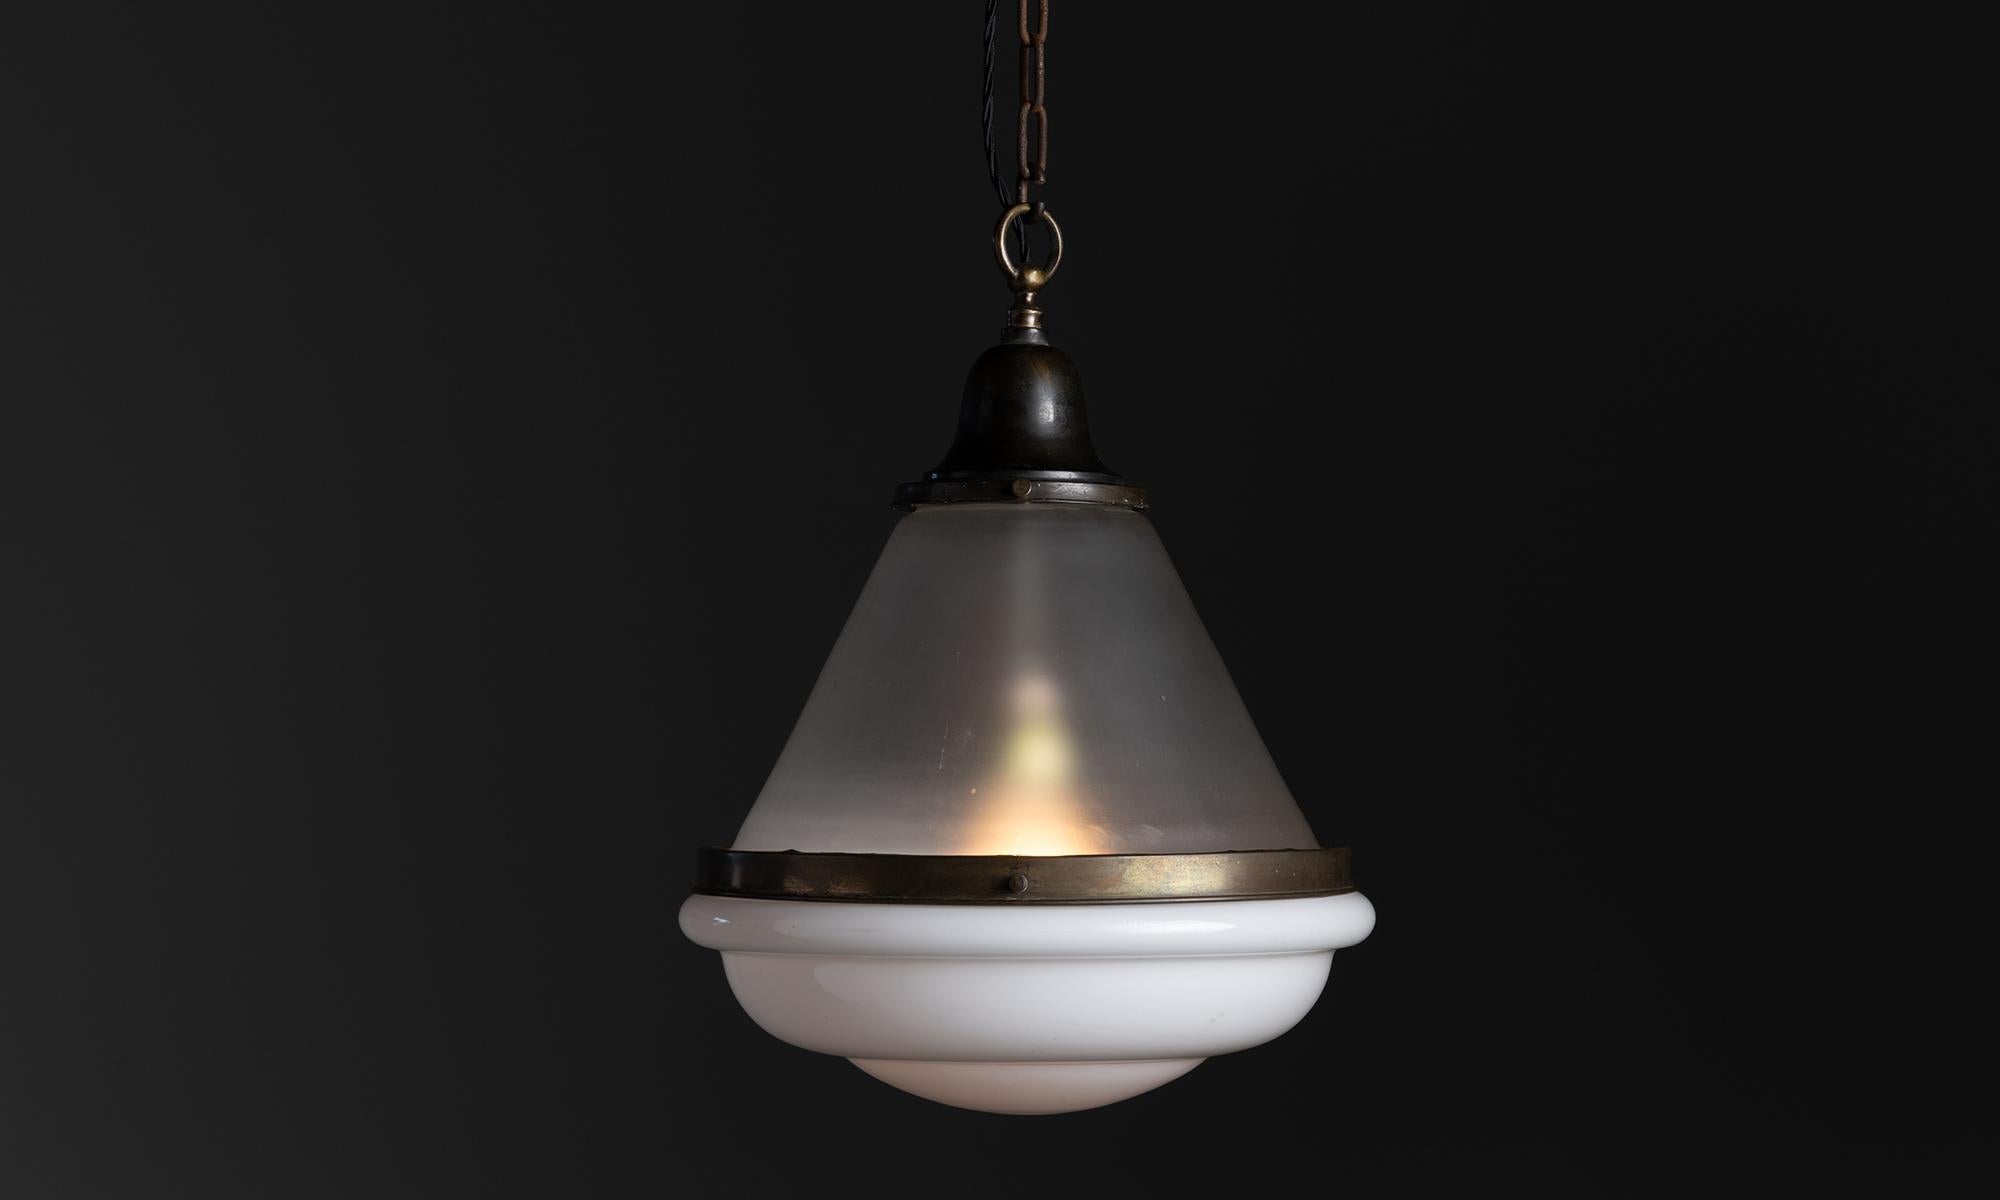 Bauhaus Pendant III

Germany circa 1920

With brass fitter and surround.

Measures 15”dia x 20”h

*Not UL Listed*